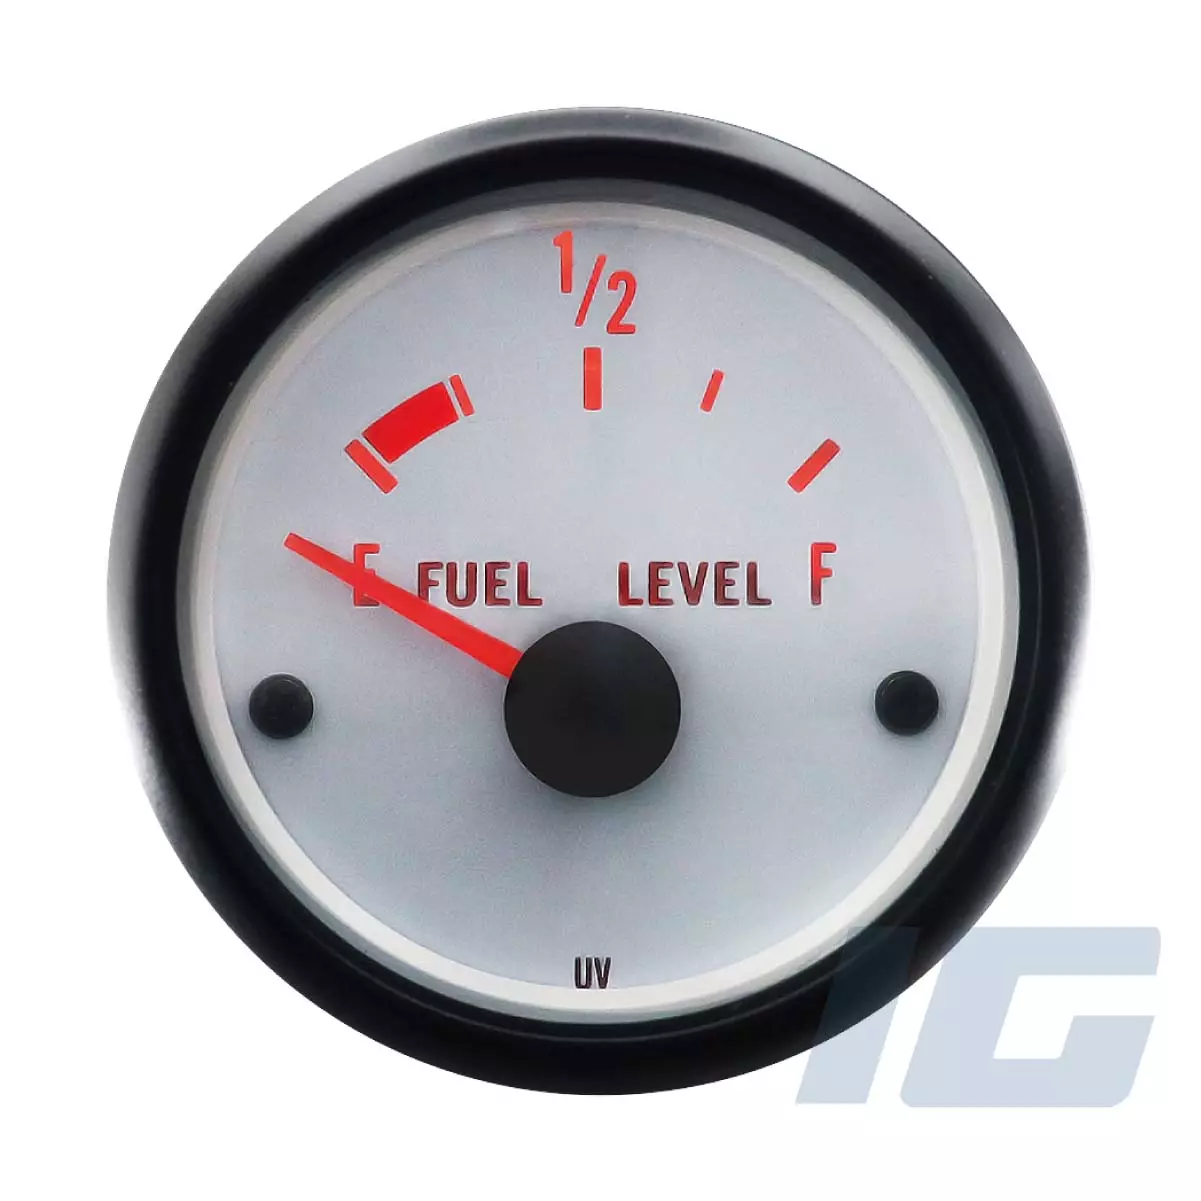 UNIVERSAL AFTERMARKET FUEL LEVEL GAUGE WITH FUEL LEVEL SENDER Aftermarket Gauges: Car, Truck, Digital, Automobile, Replacement